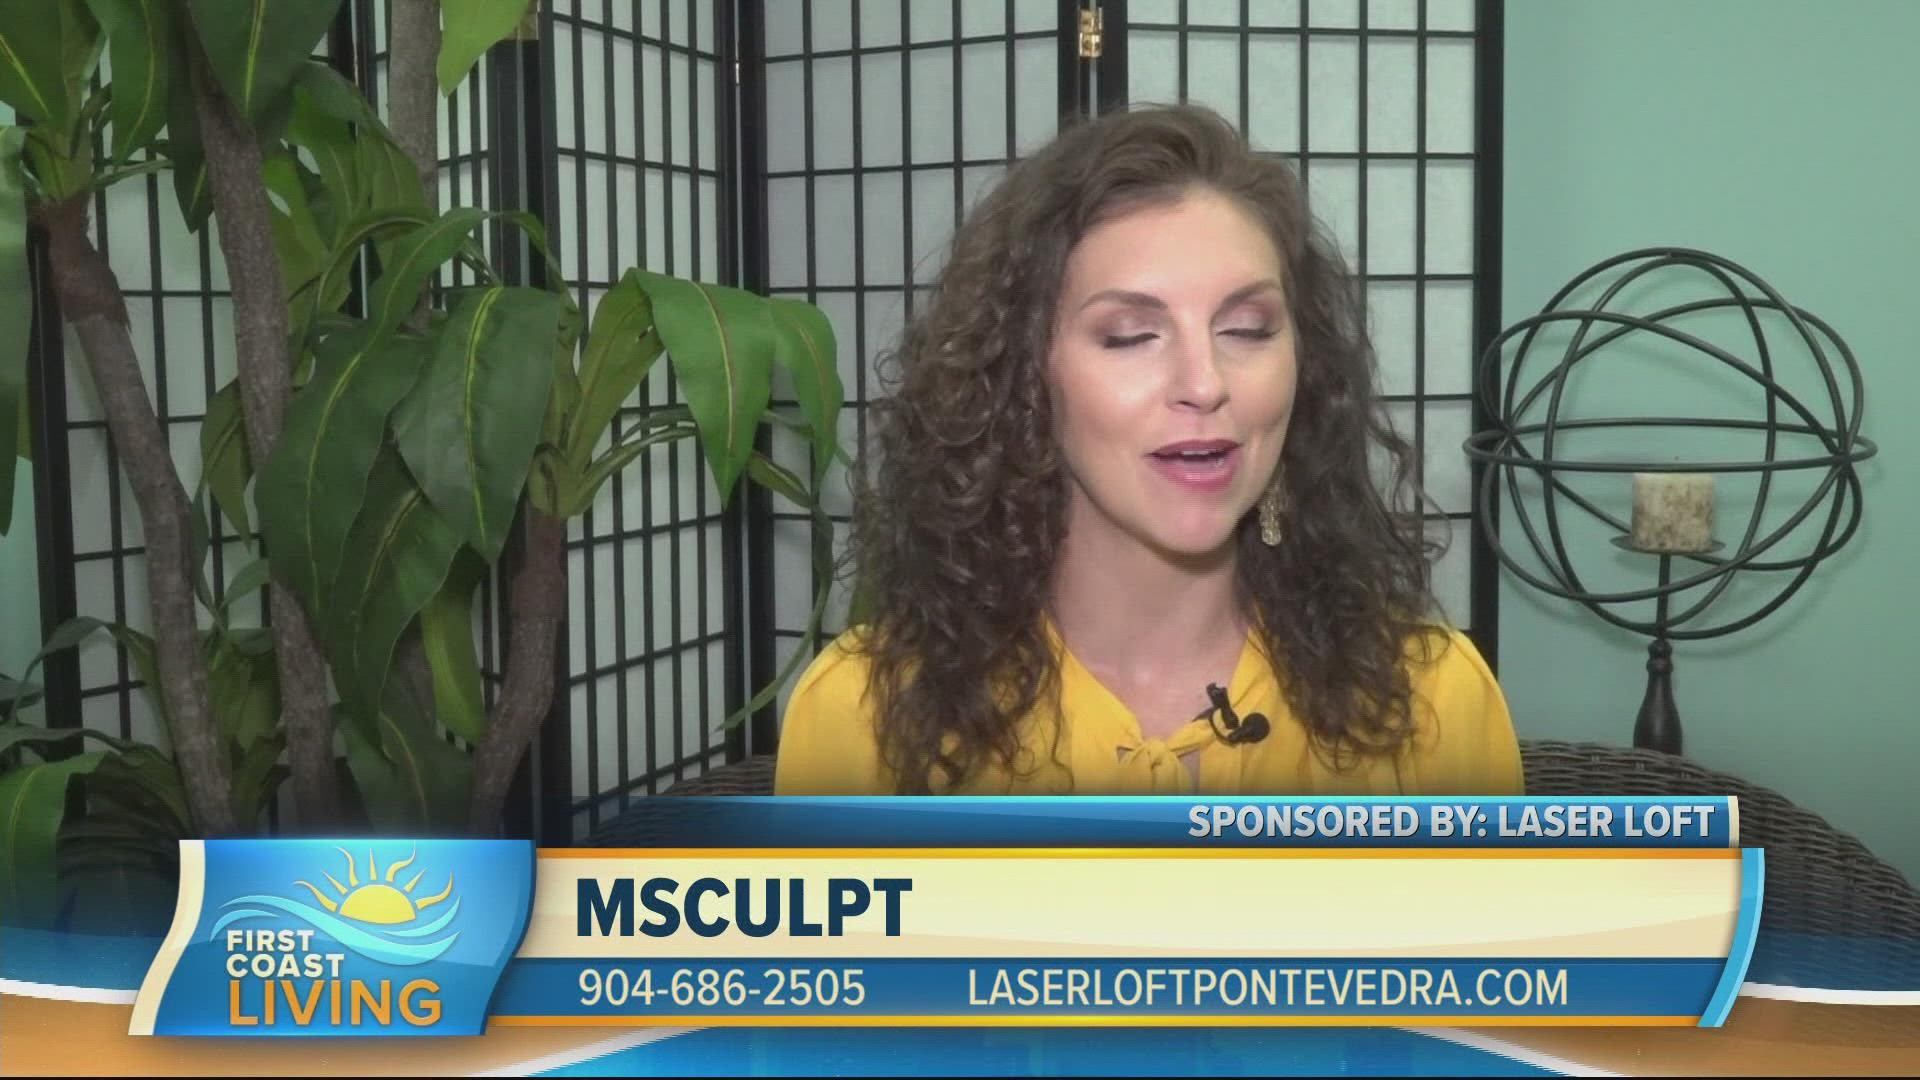 Laser Loft Spa Director, Kira Fernandes discusses how MSculpt works and who's a candidate for this procedure.